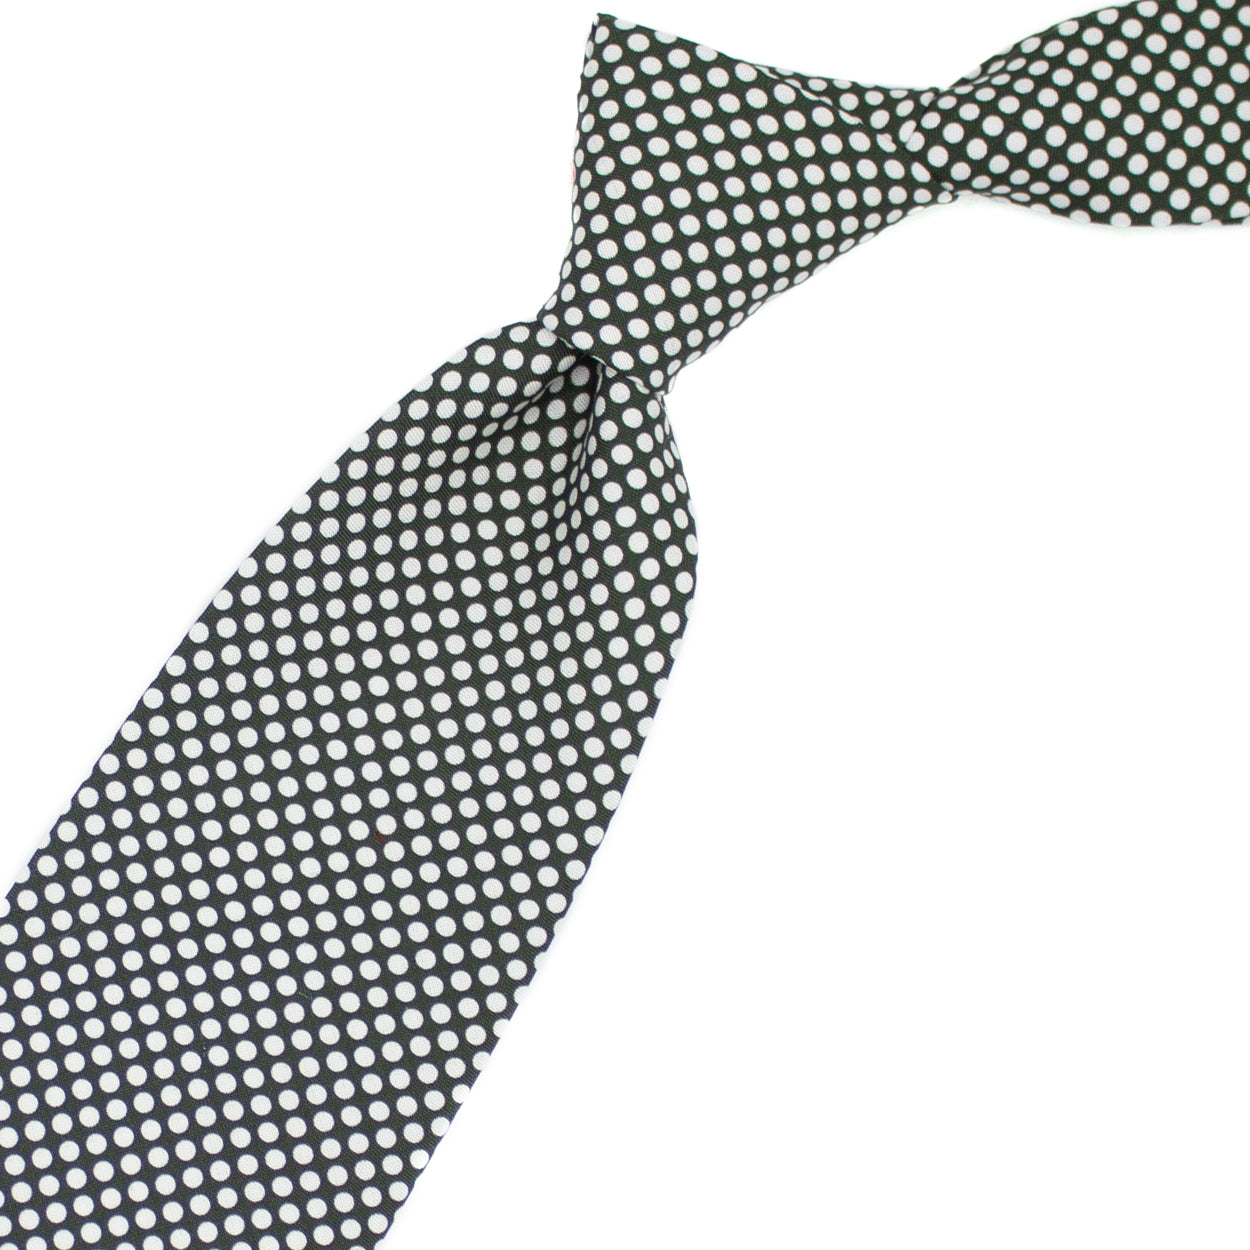 Green tie with white polka dots